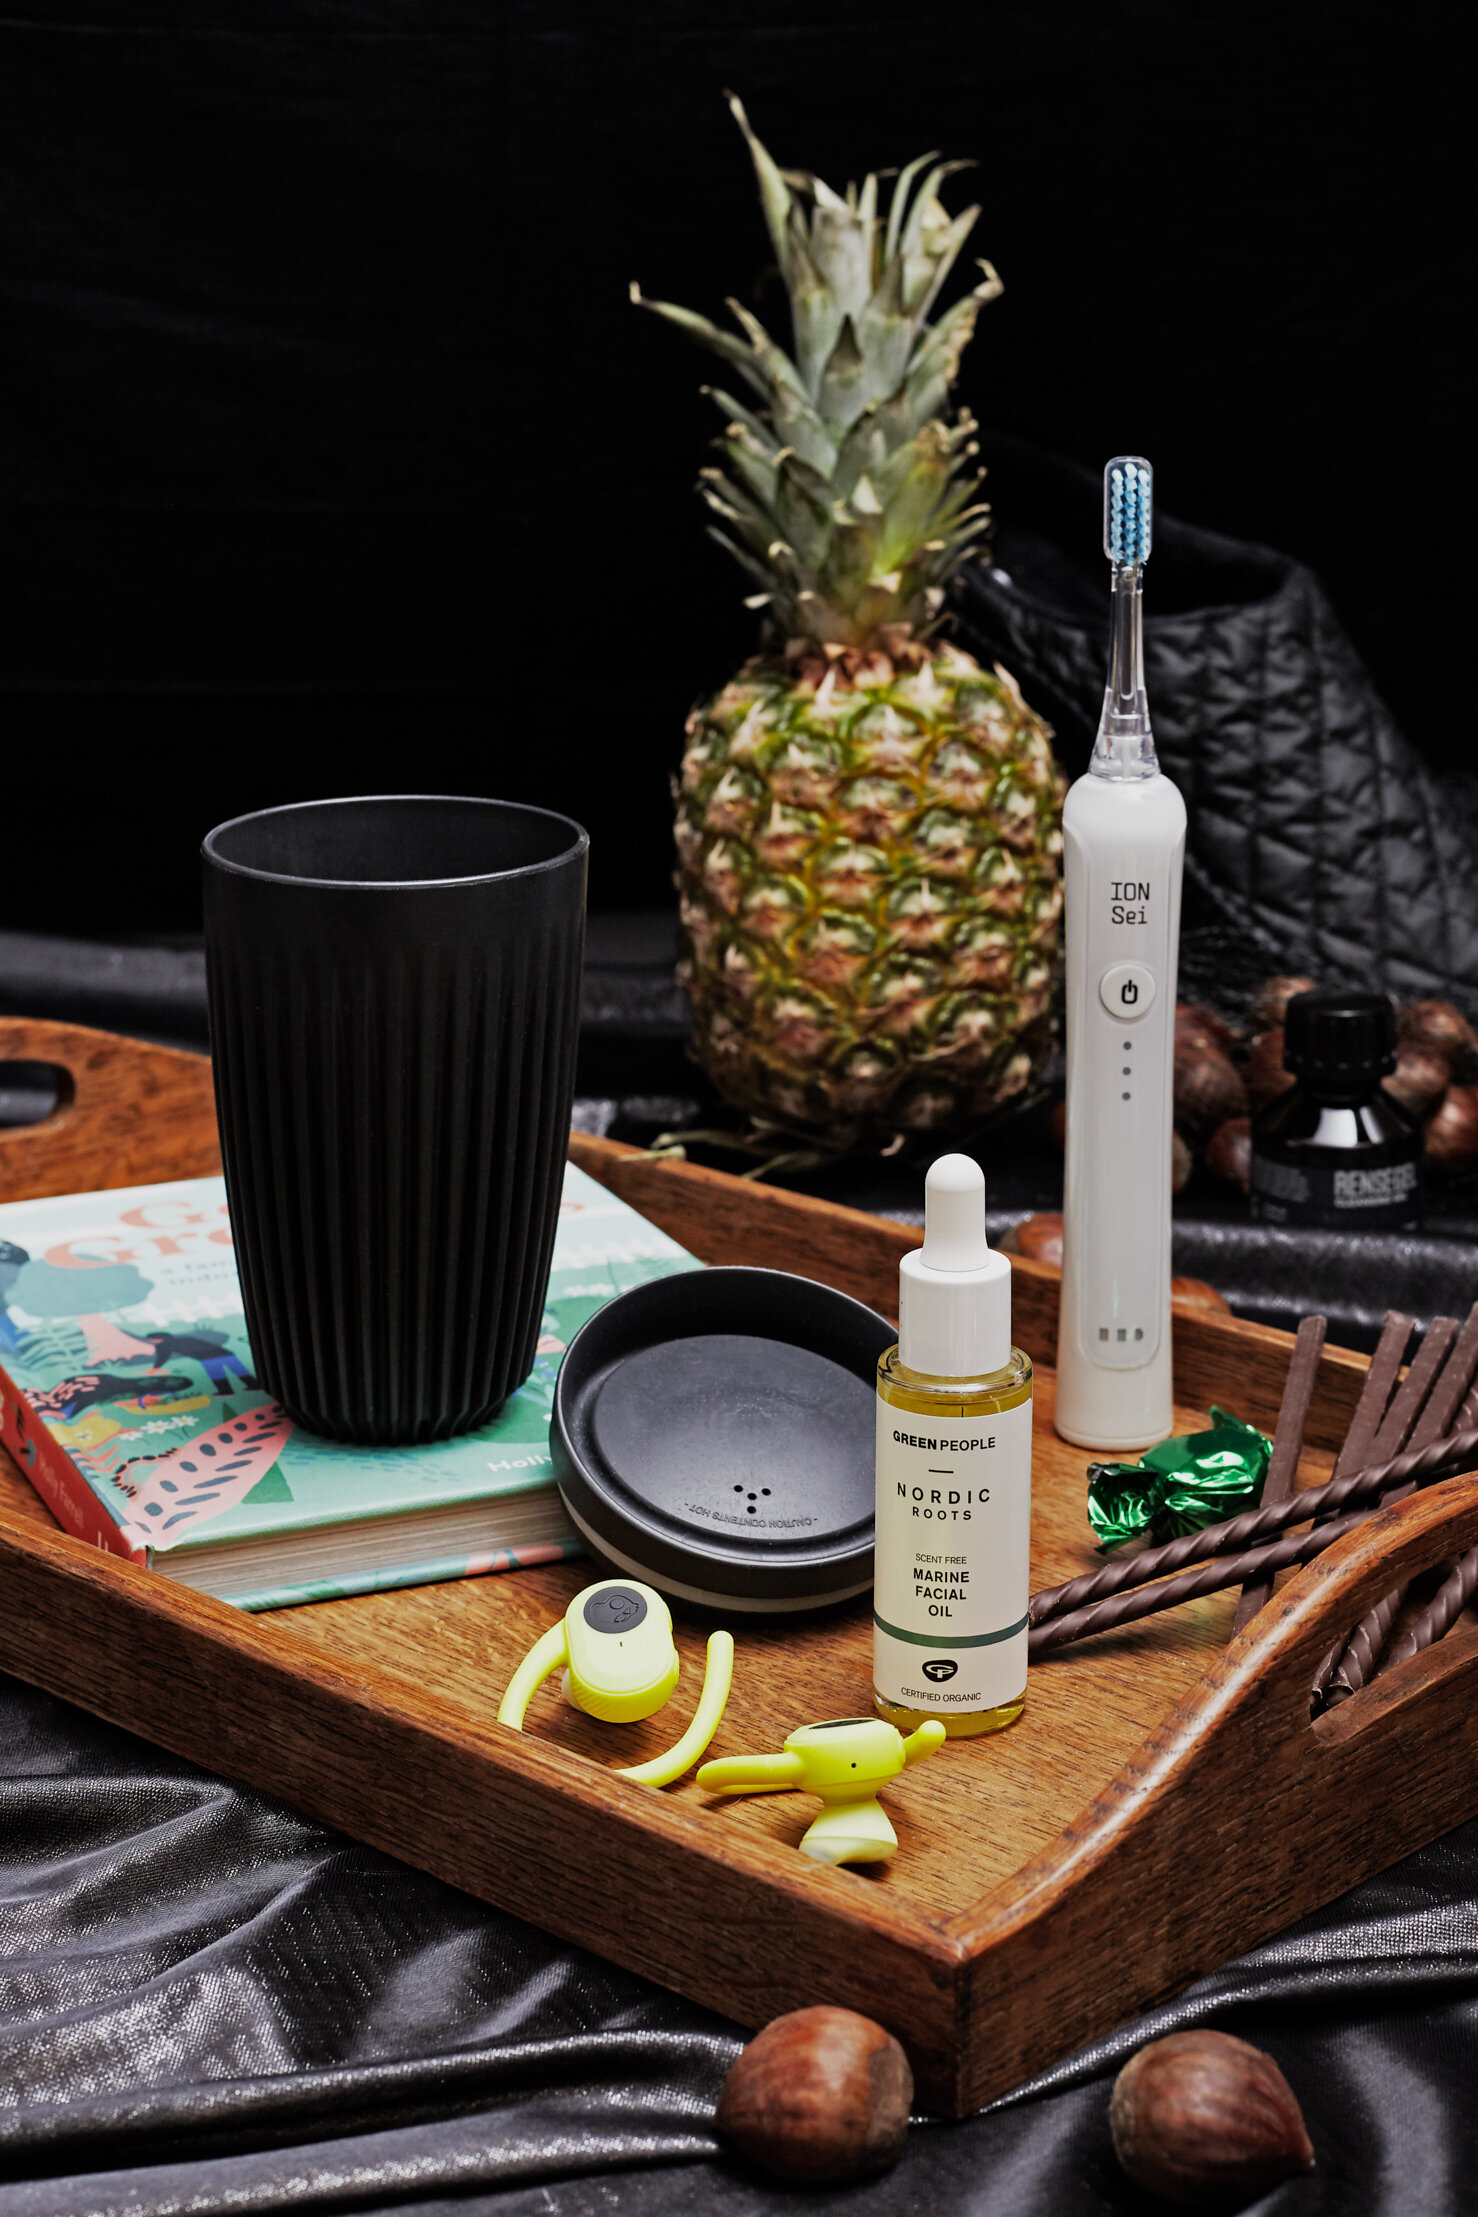  HUSKEE  8oz Reusable Cup  @ Zero-Living £14.49   GREEN PEOPLE  Nordic Roots Marine Facial Oil  £28   ION SEI   Electric Toothbrush  £130     